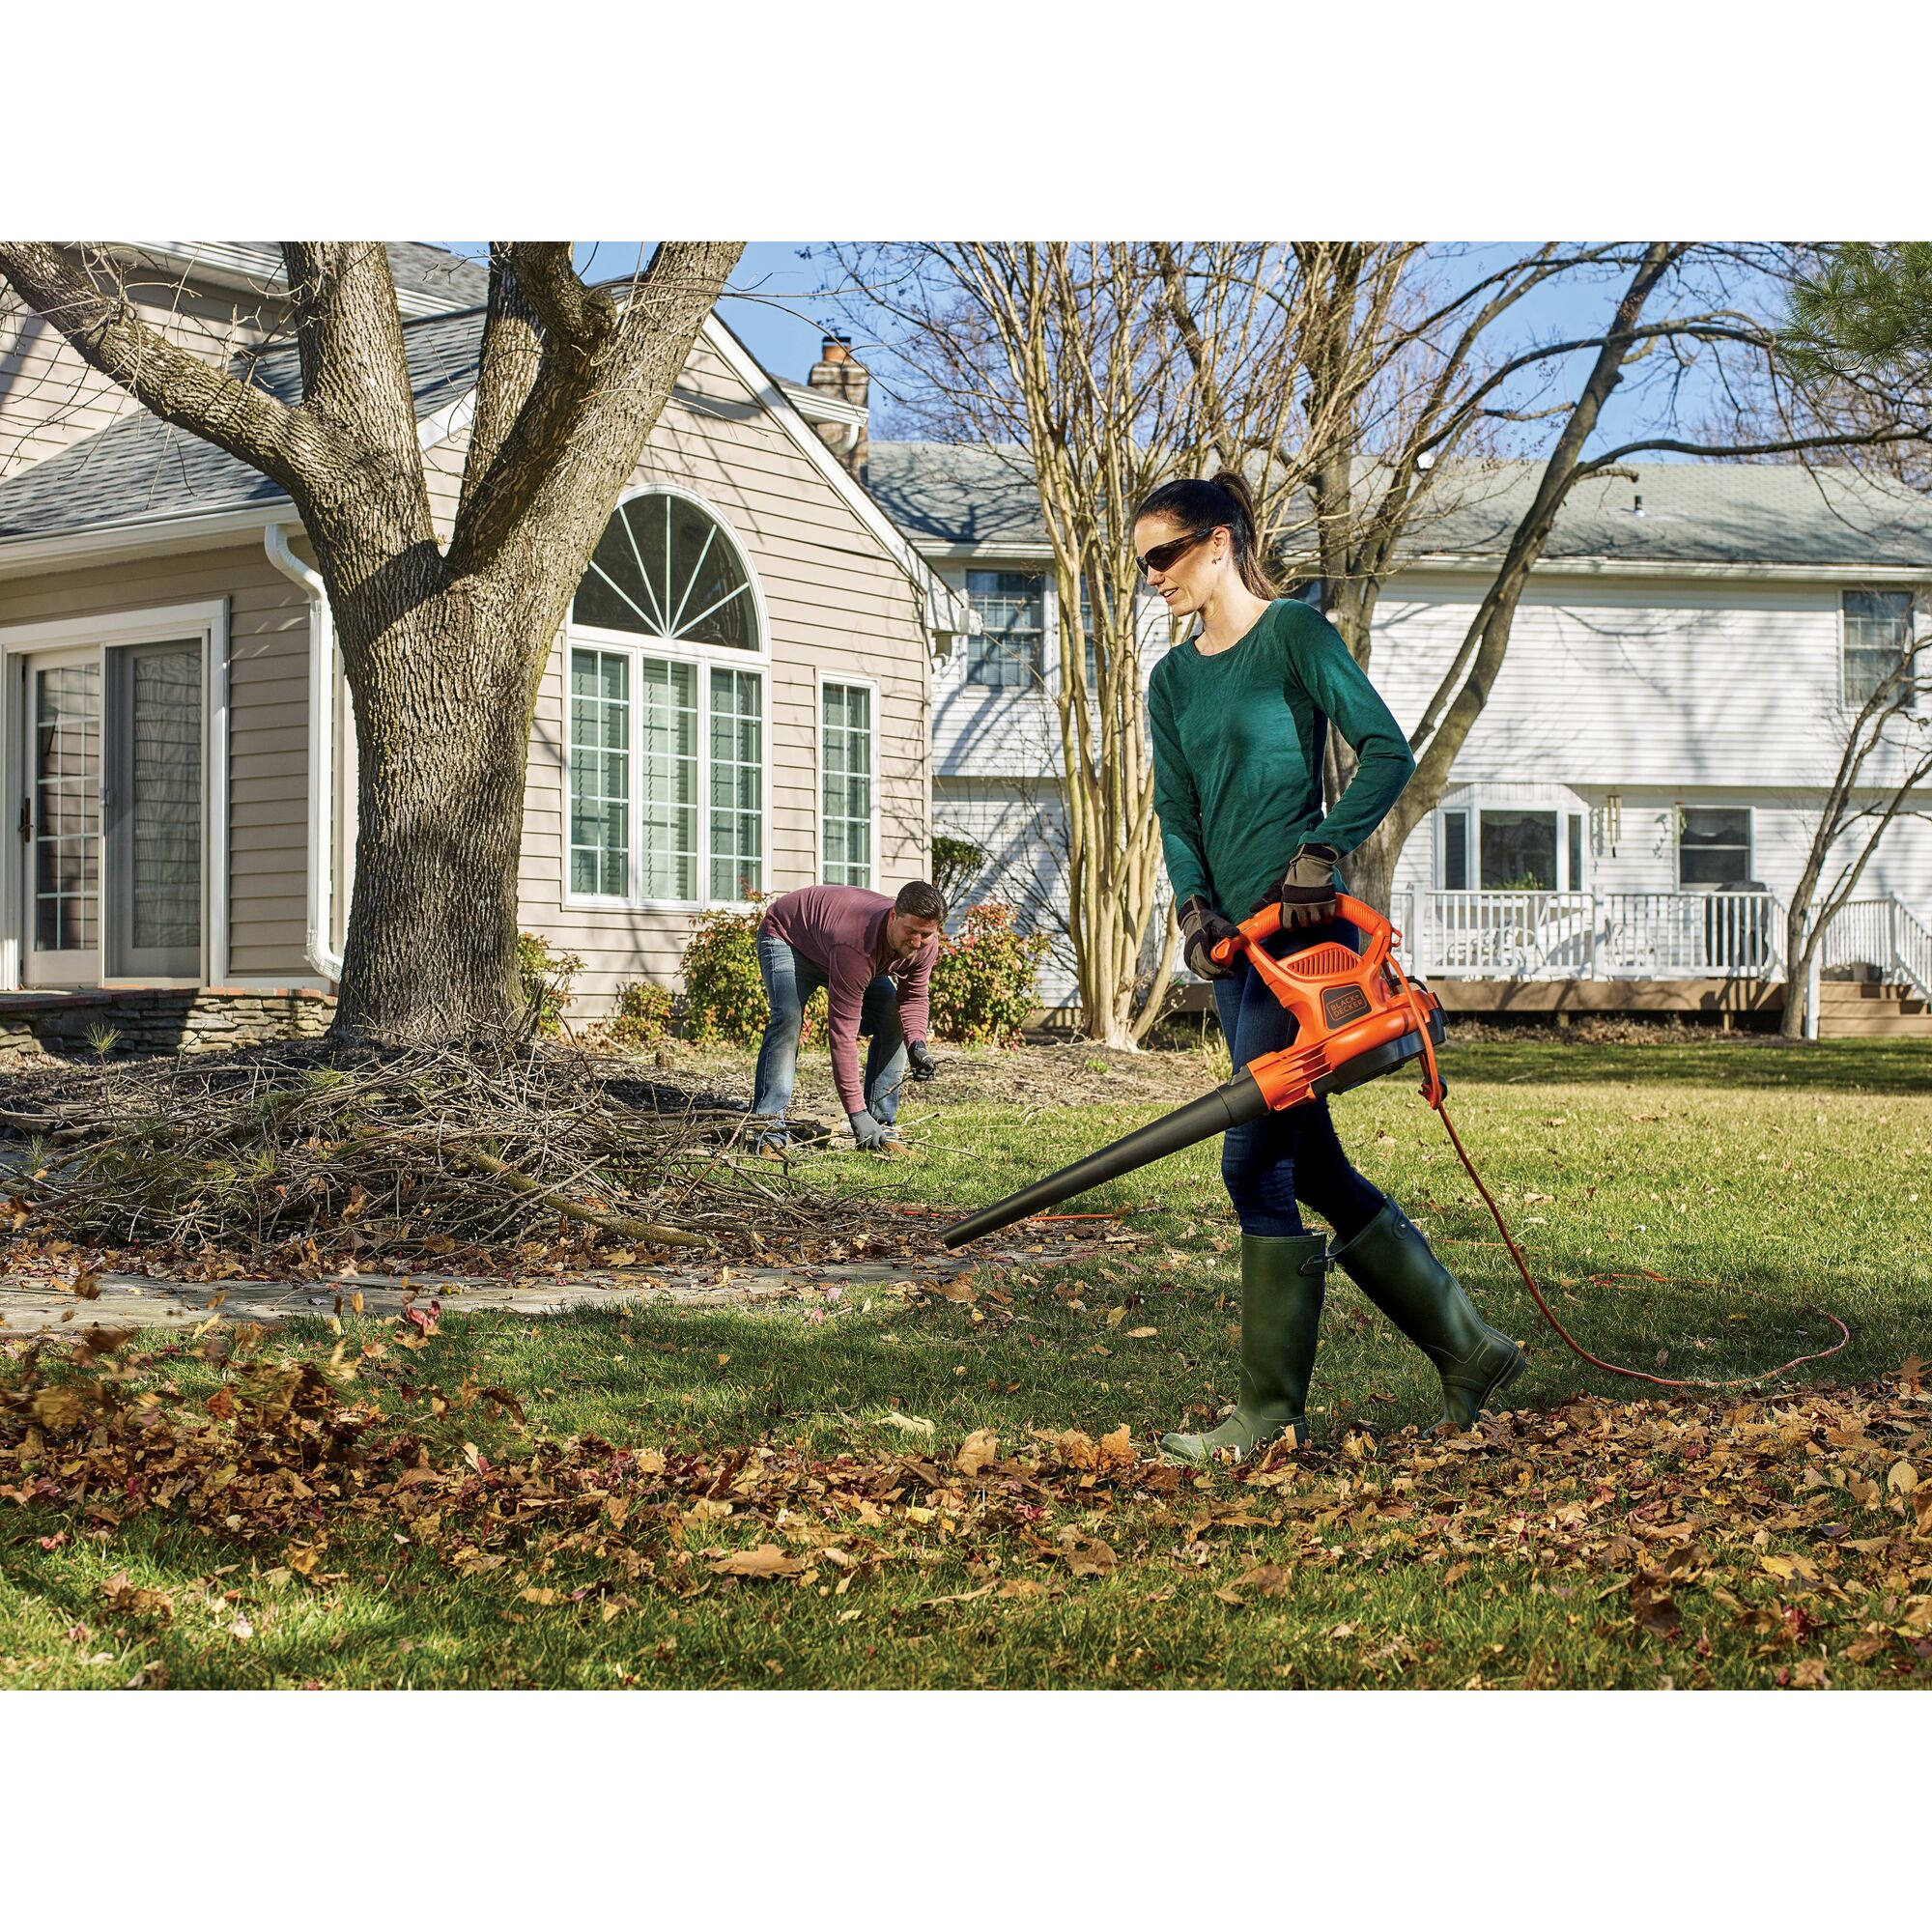 3 in 1 VACPACK 12 Ampere leaf blower, vacuum, and mulcher being used by a person outdoors.